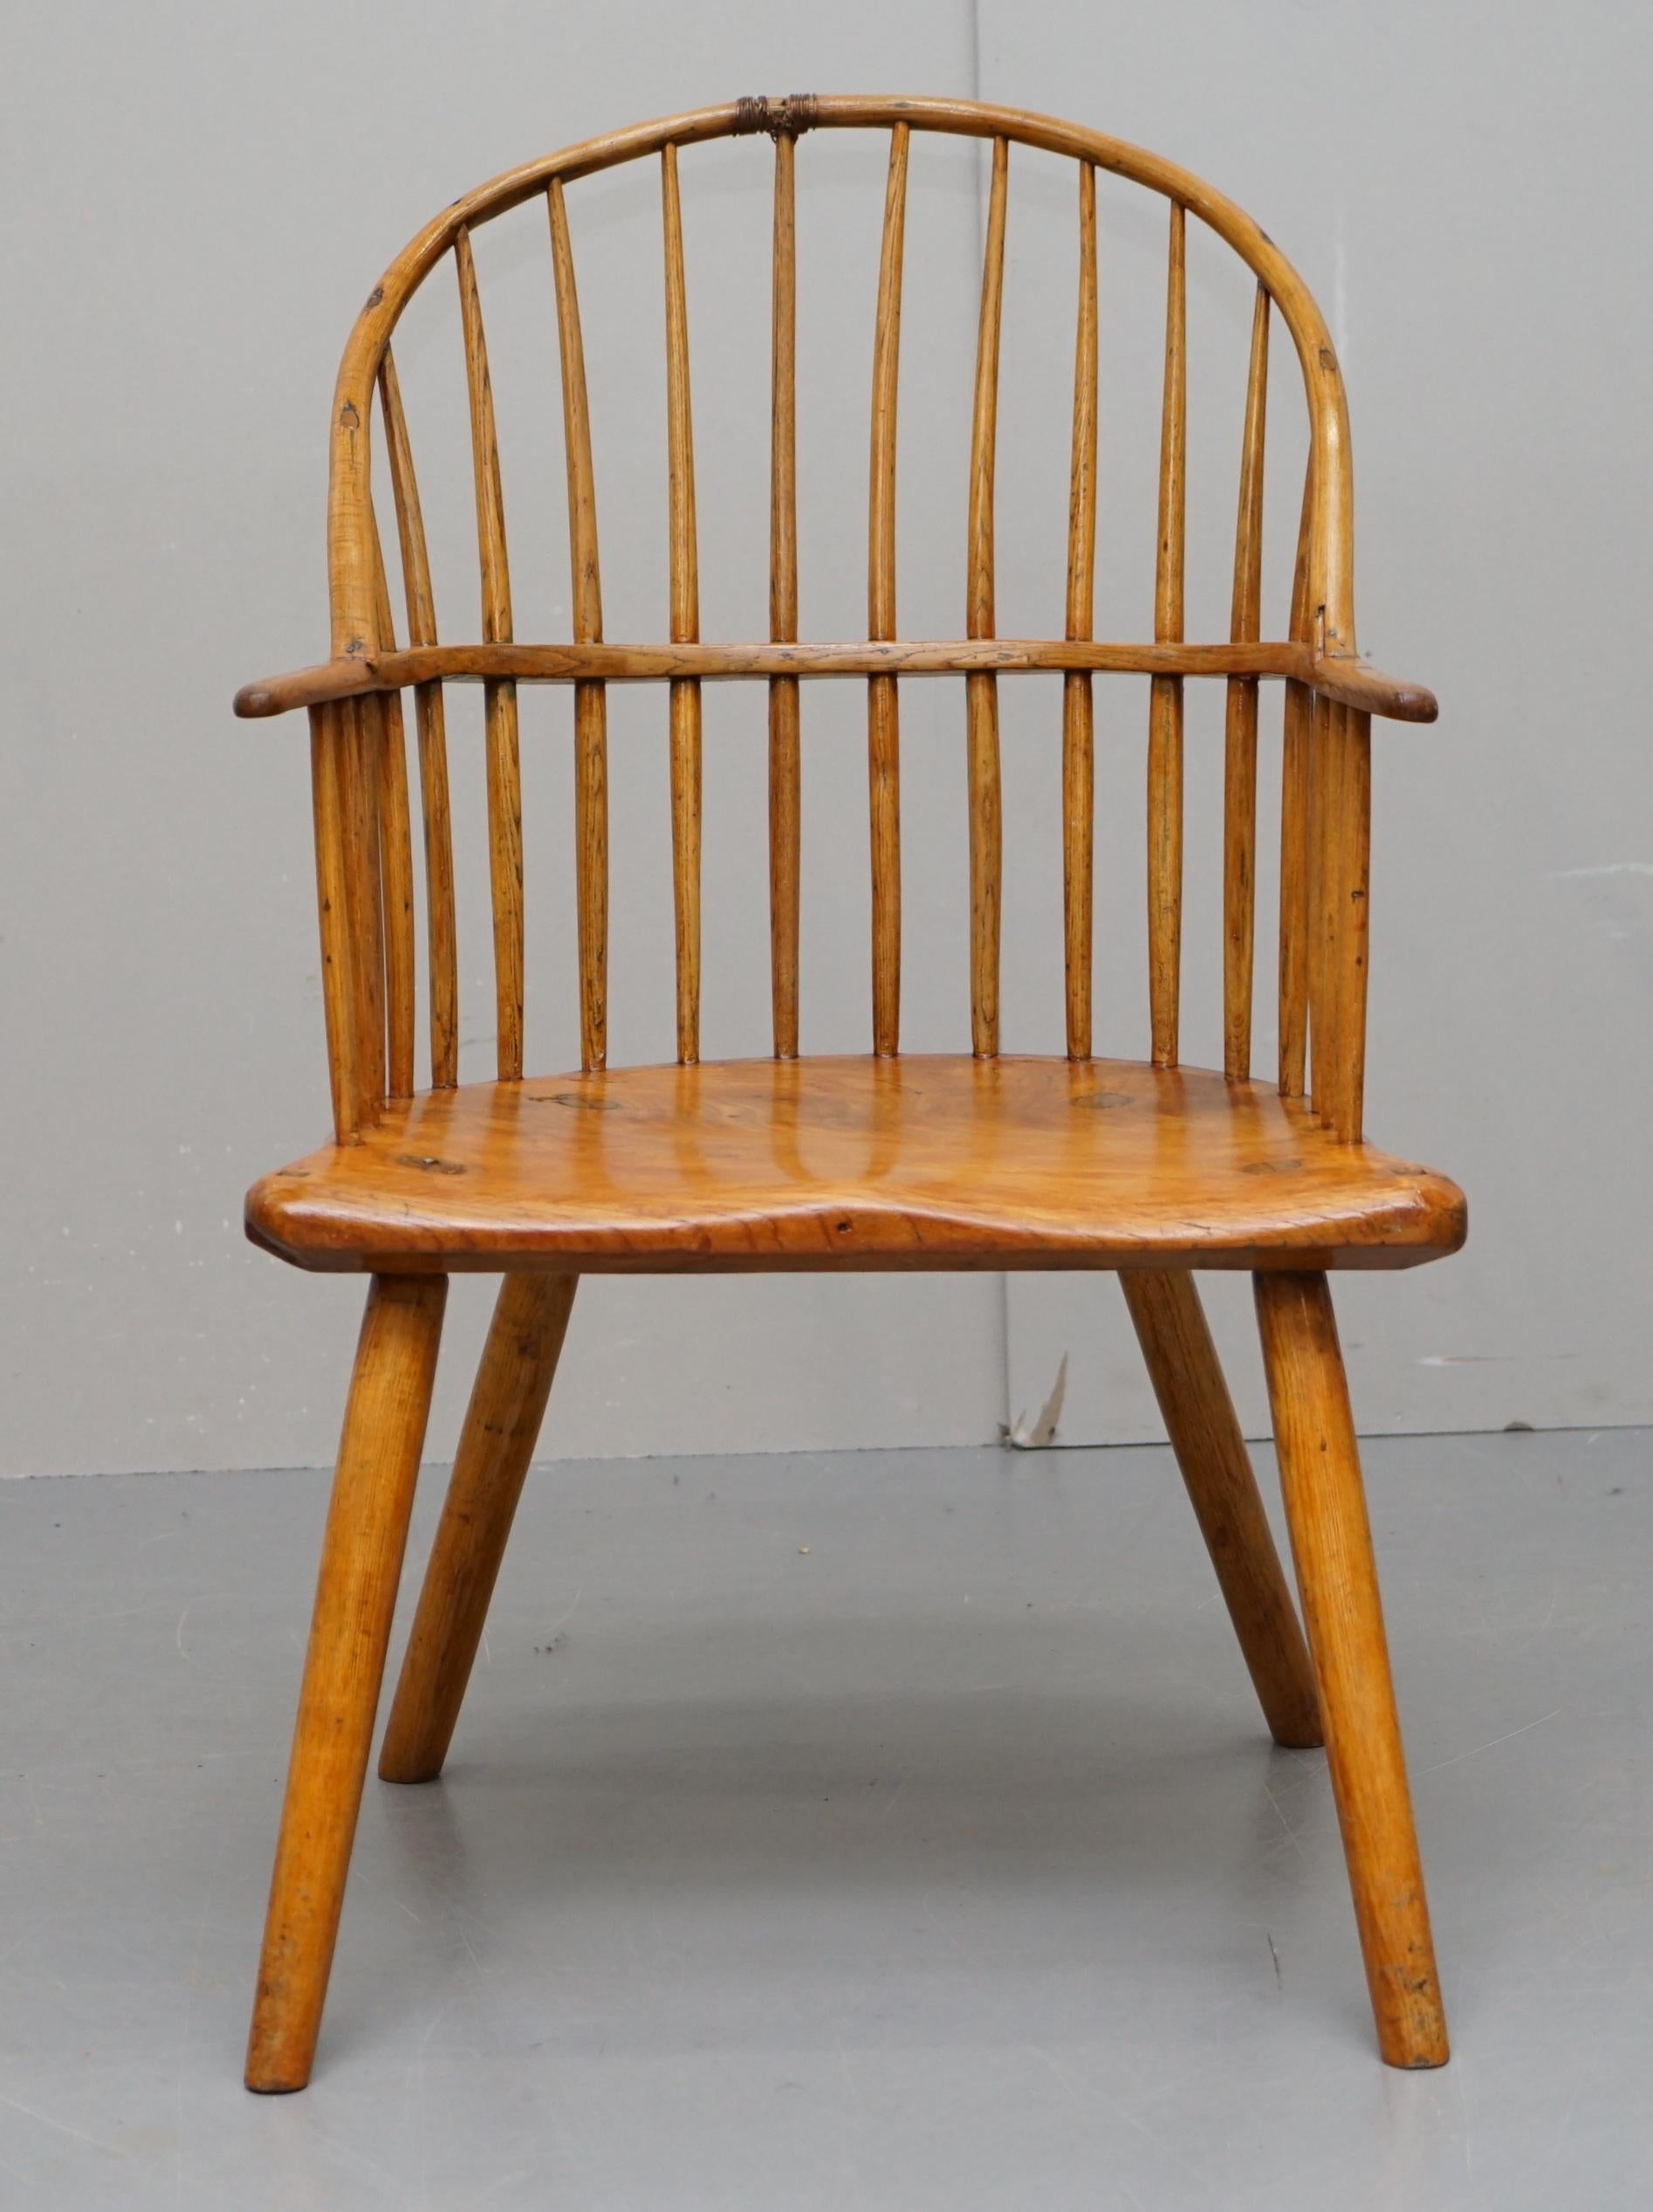 We are delighted to offer for sale this absolutely sublime mid-18th century circa 1760 solid Yew wood Windsor stick back armchair

If you are looking at this listing then the chances are you know what this chair is, how rare the timber is and how